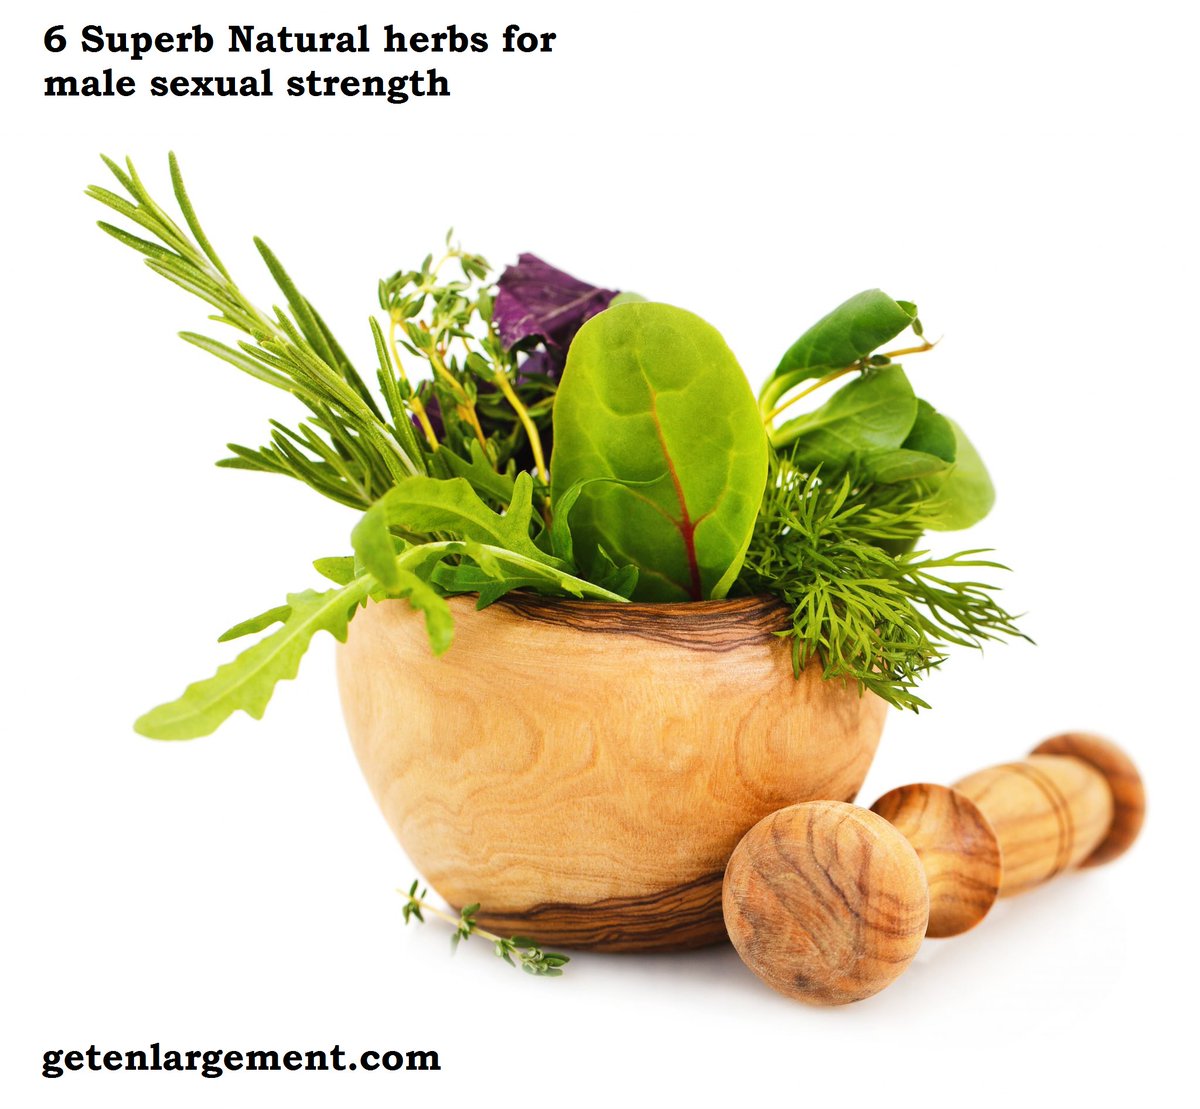 Superb Natural herbs for #malestrength
#NaturalHerbs for male having low #sexual stamina. Boost your stmaina with natural herbs. For more info: bit.ly/314insk
#herbalcream #Menshealth